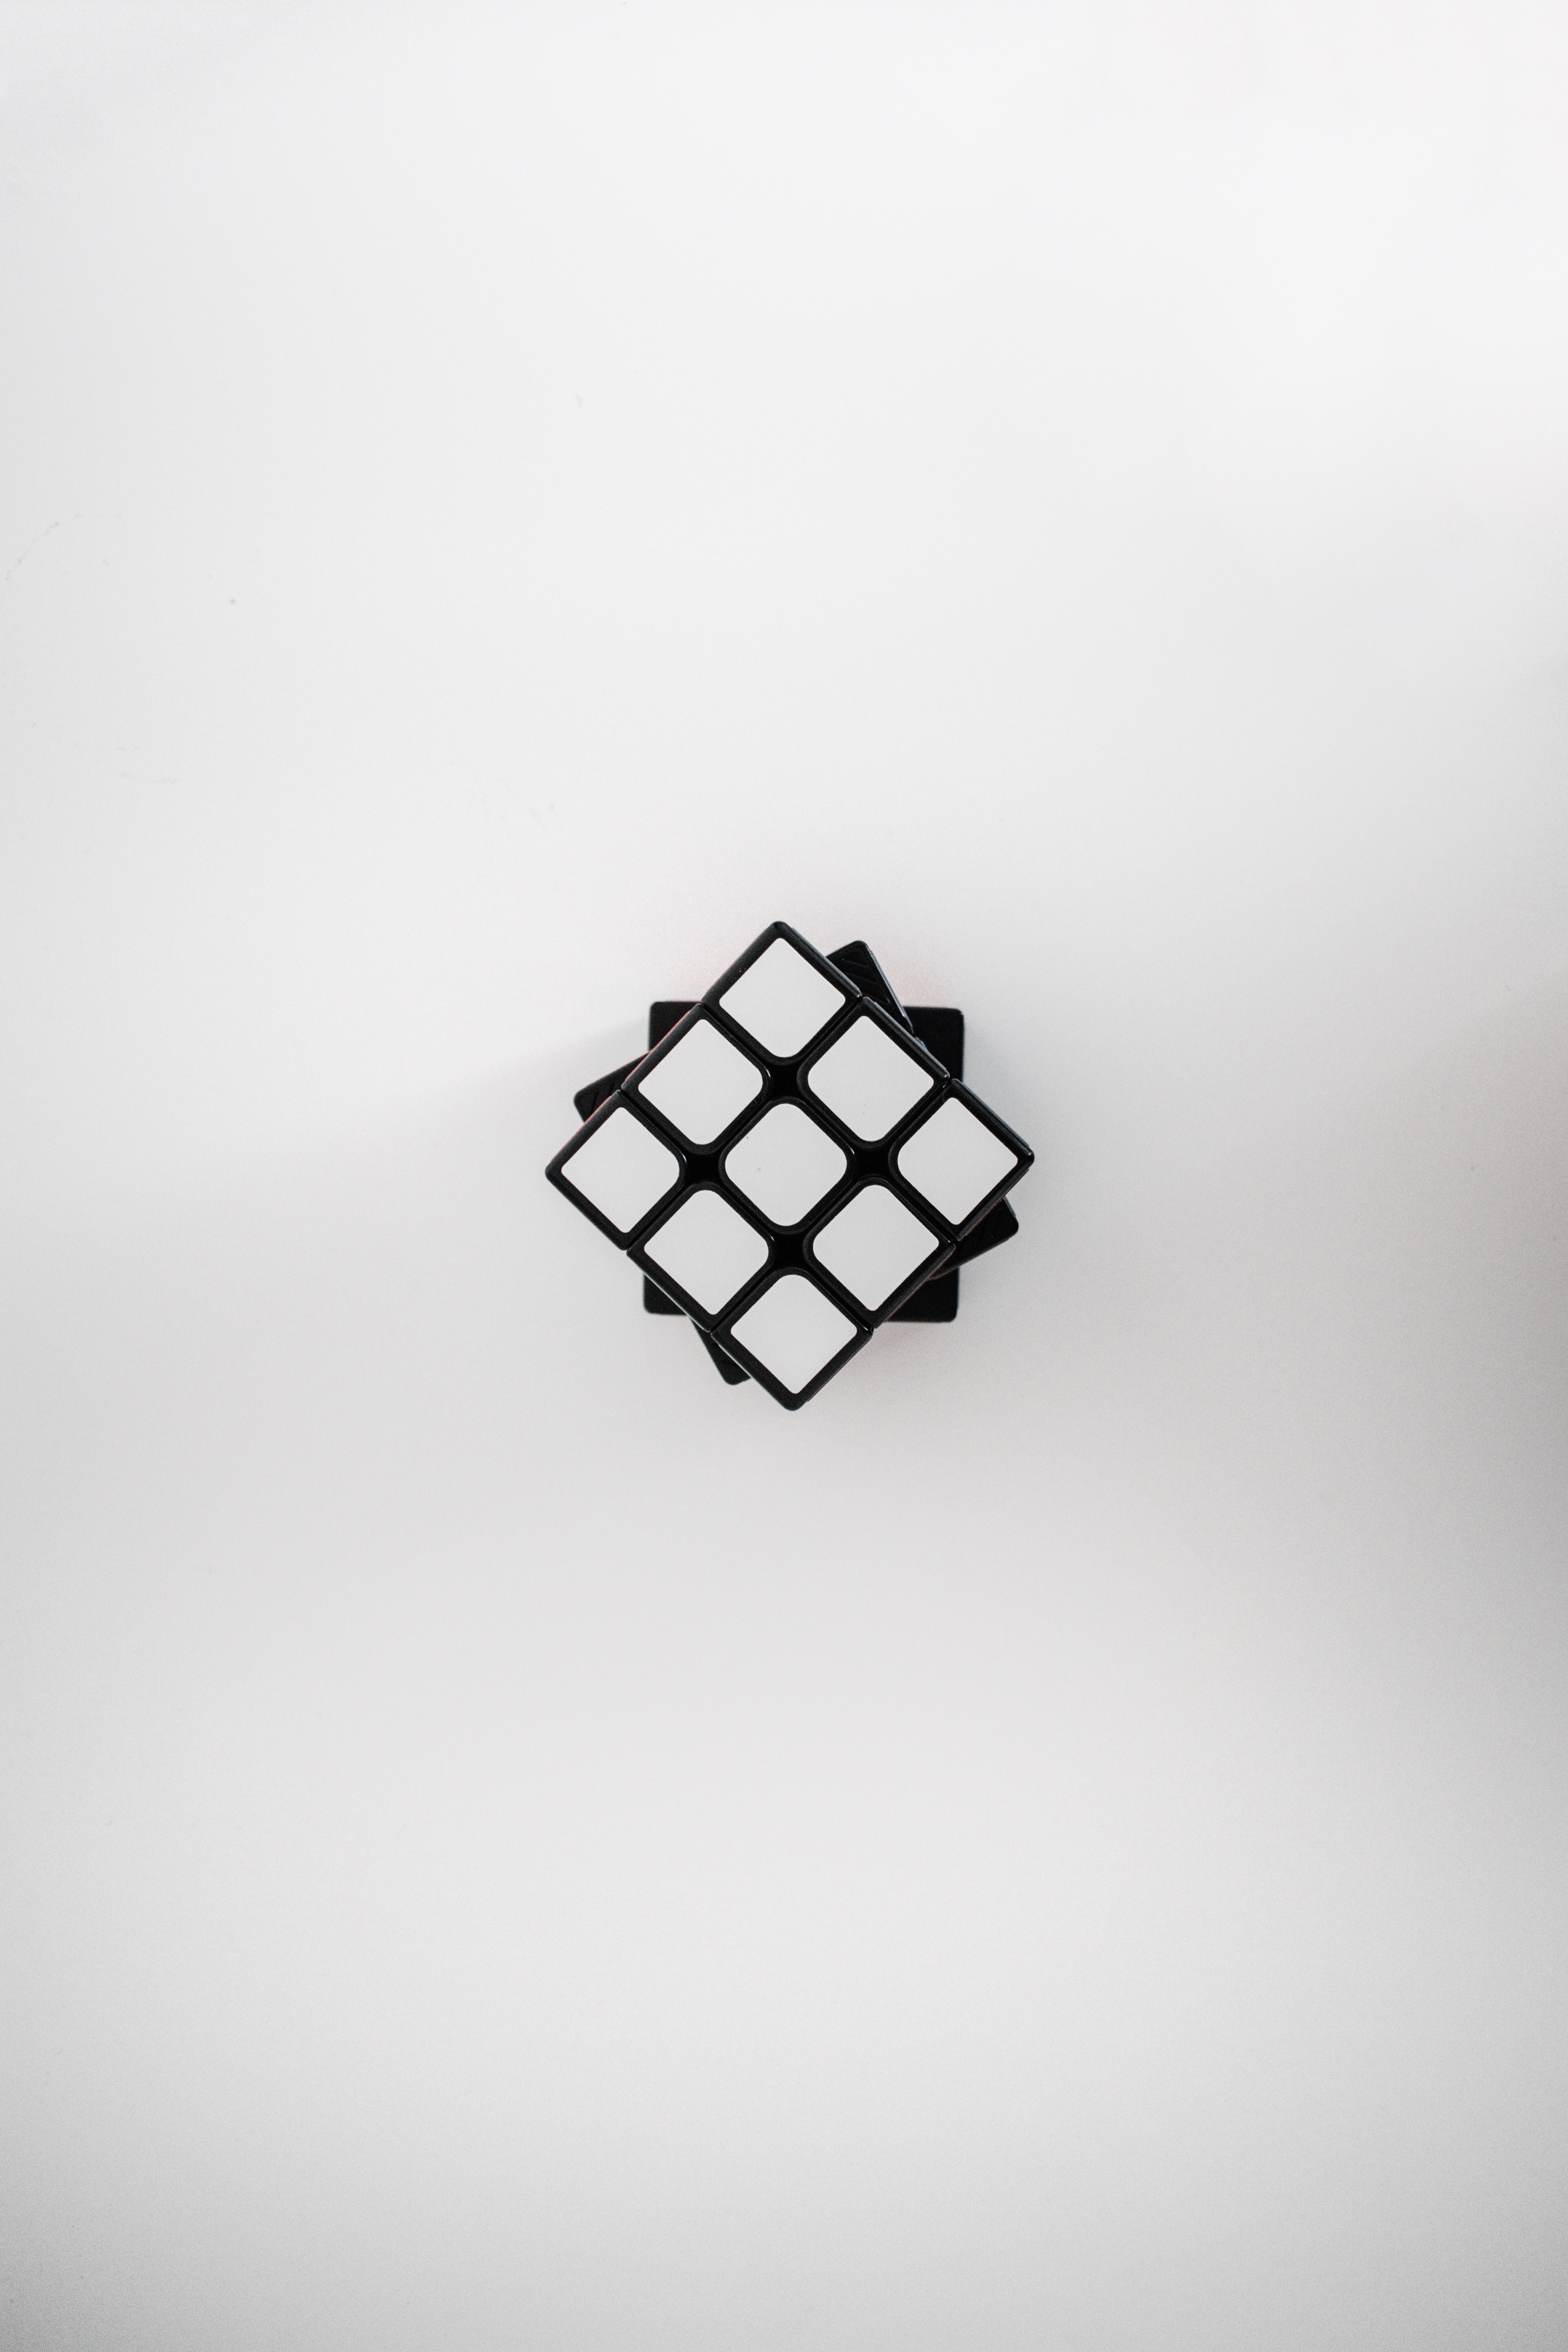 vertical wallpaper rubik's cube, miscellanea, cube, white, view from above, miscellaneous